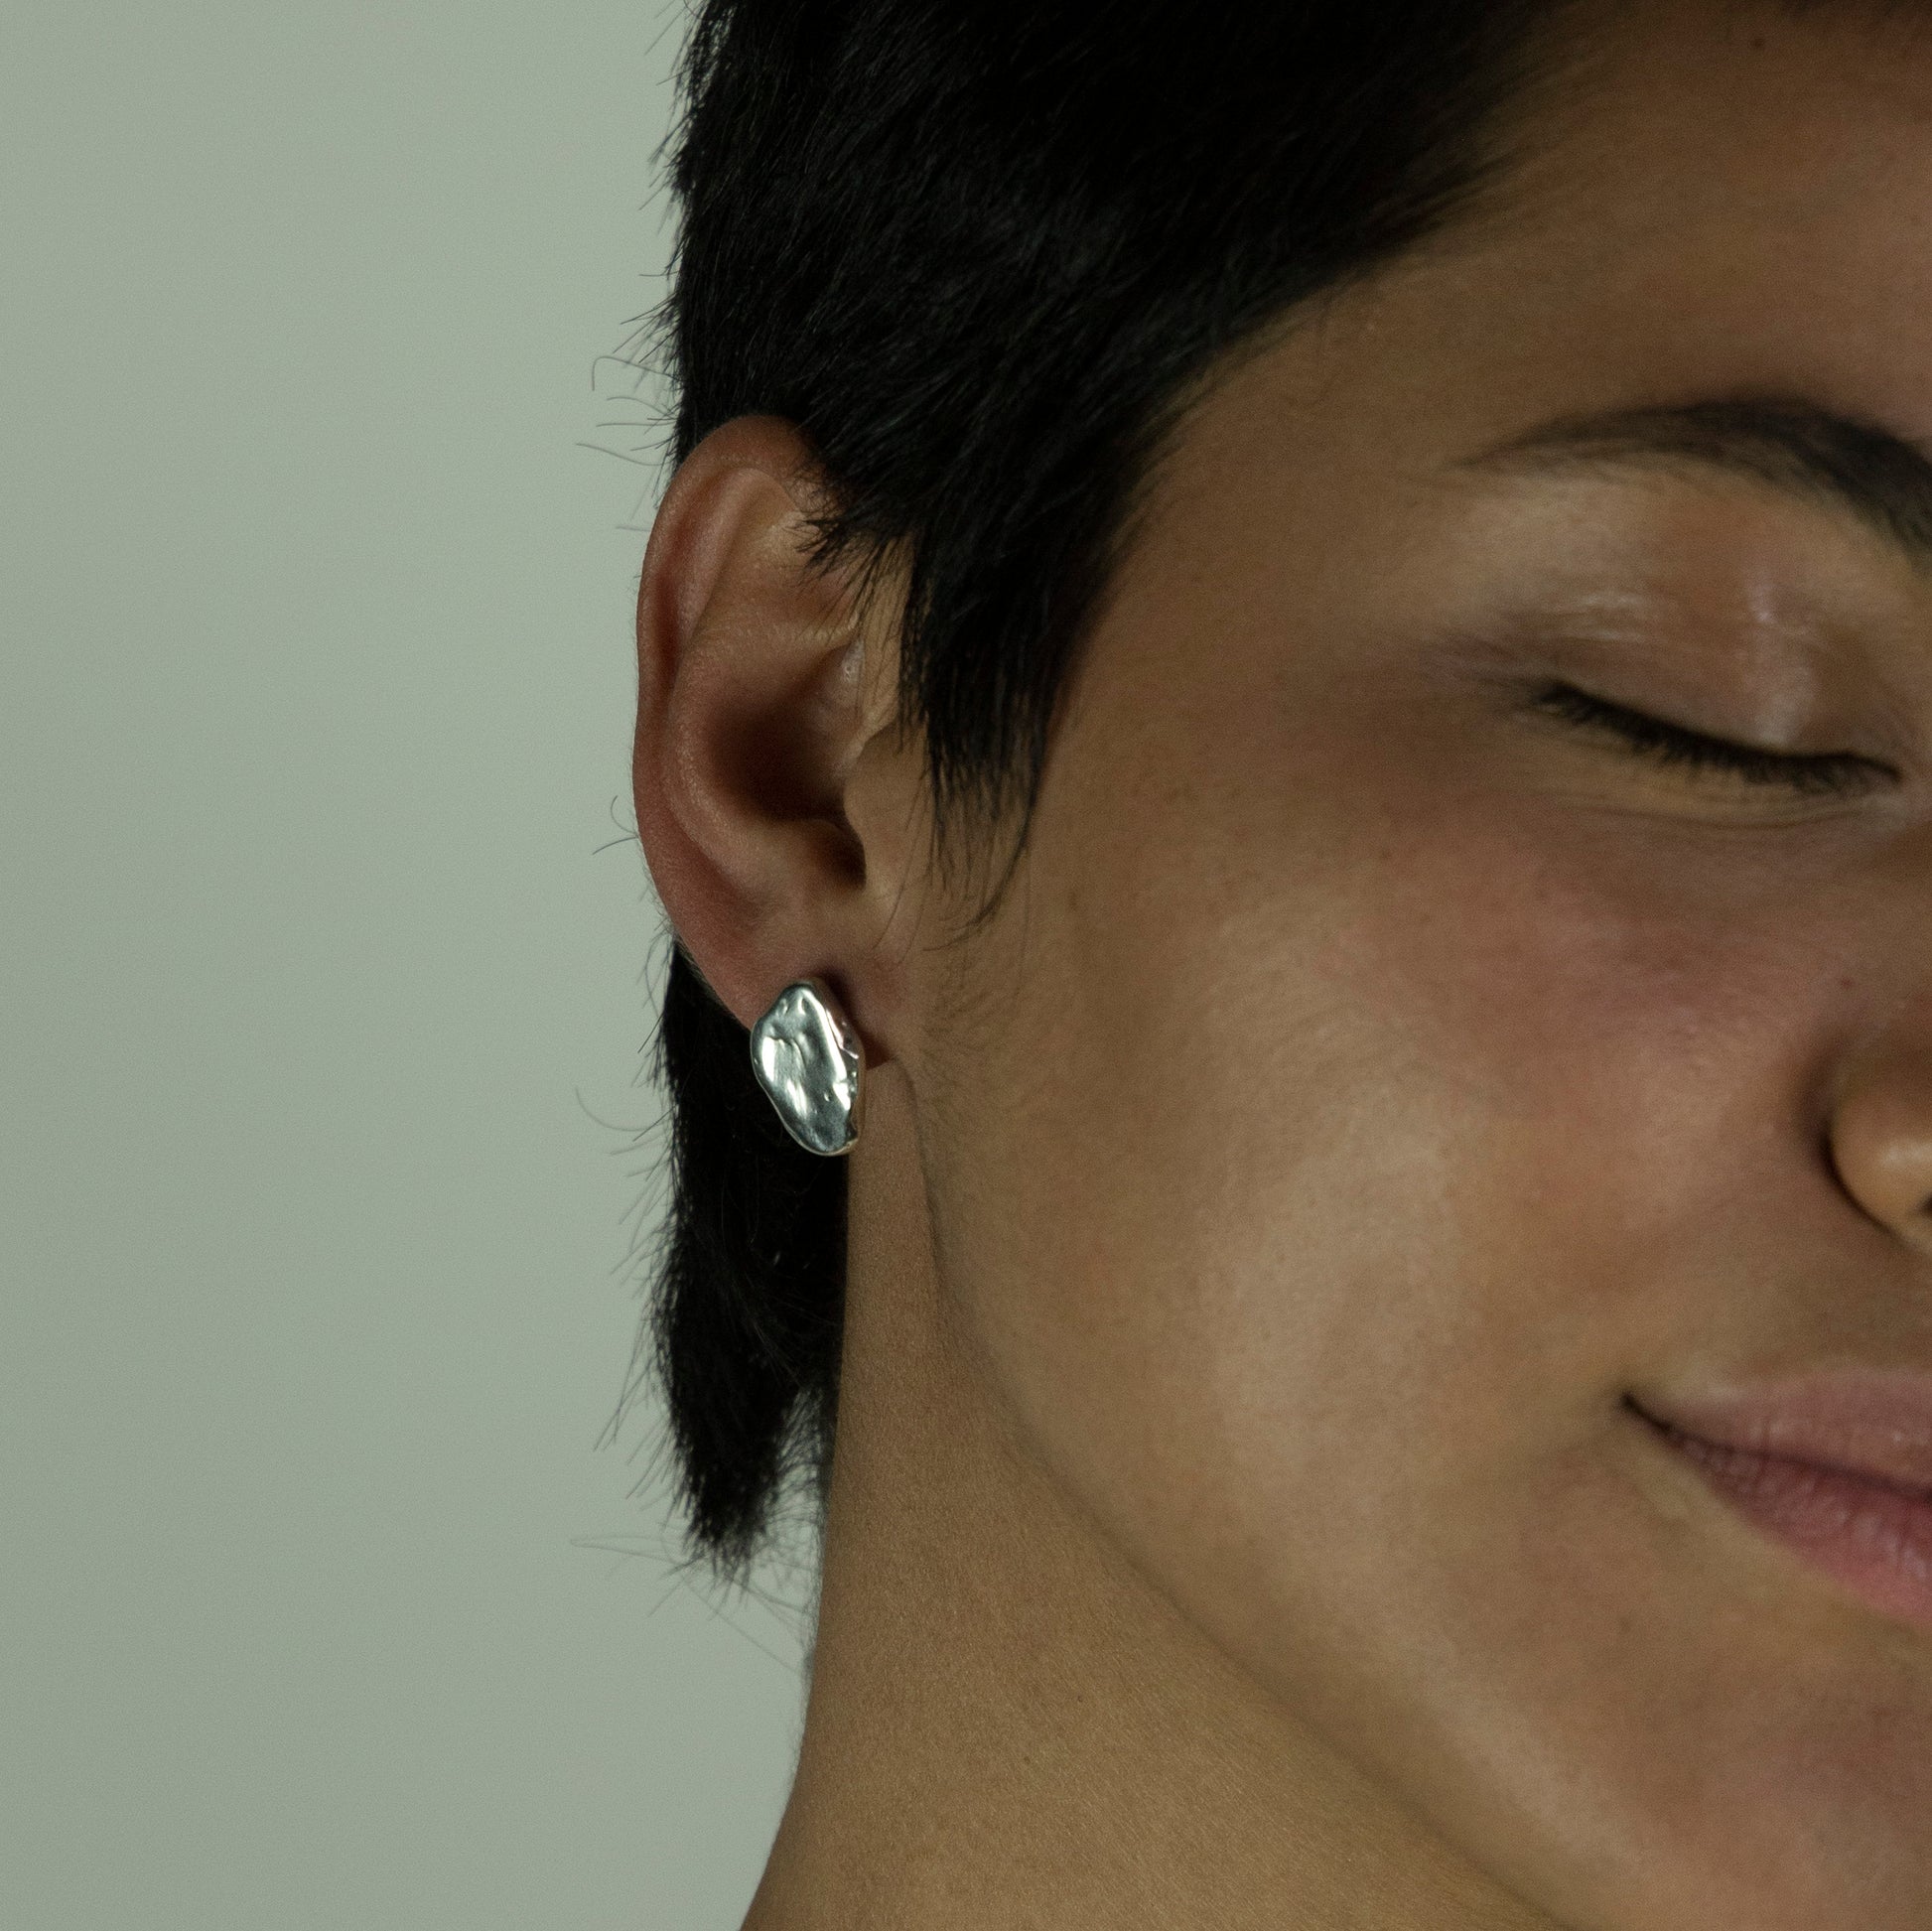 The Harpe earrings are handmade and made of 925 sterling silver. Their surface is raw and shiny